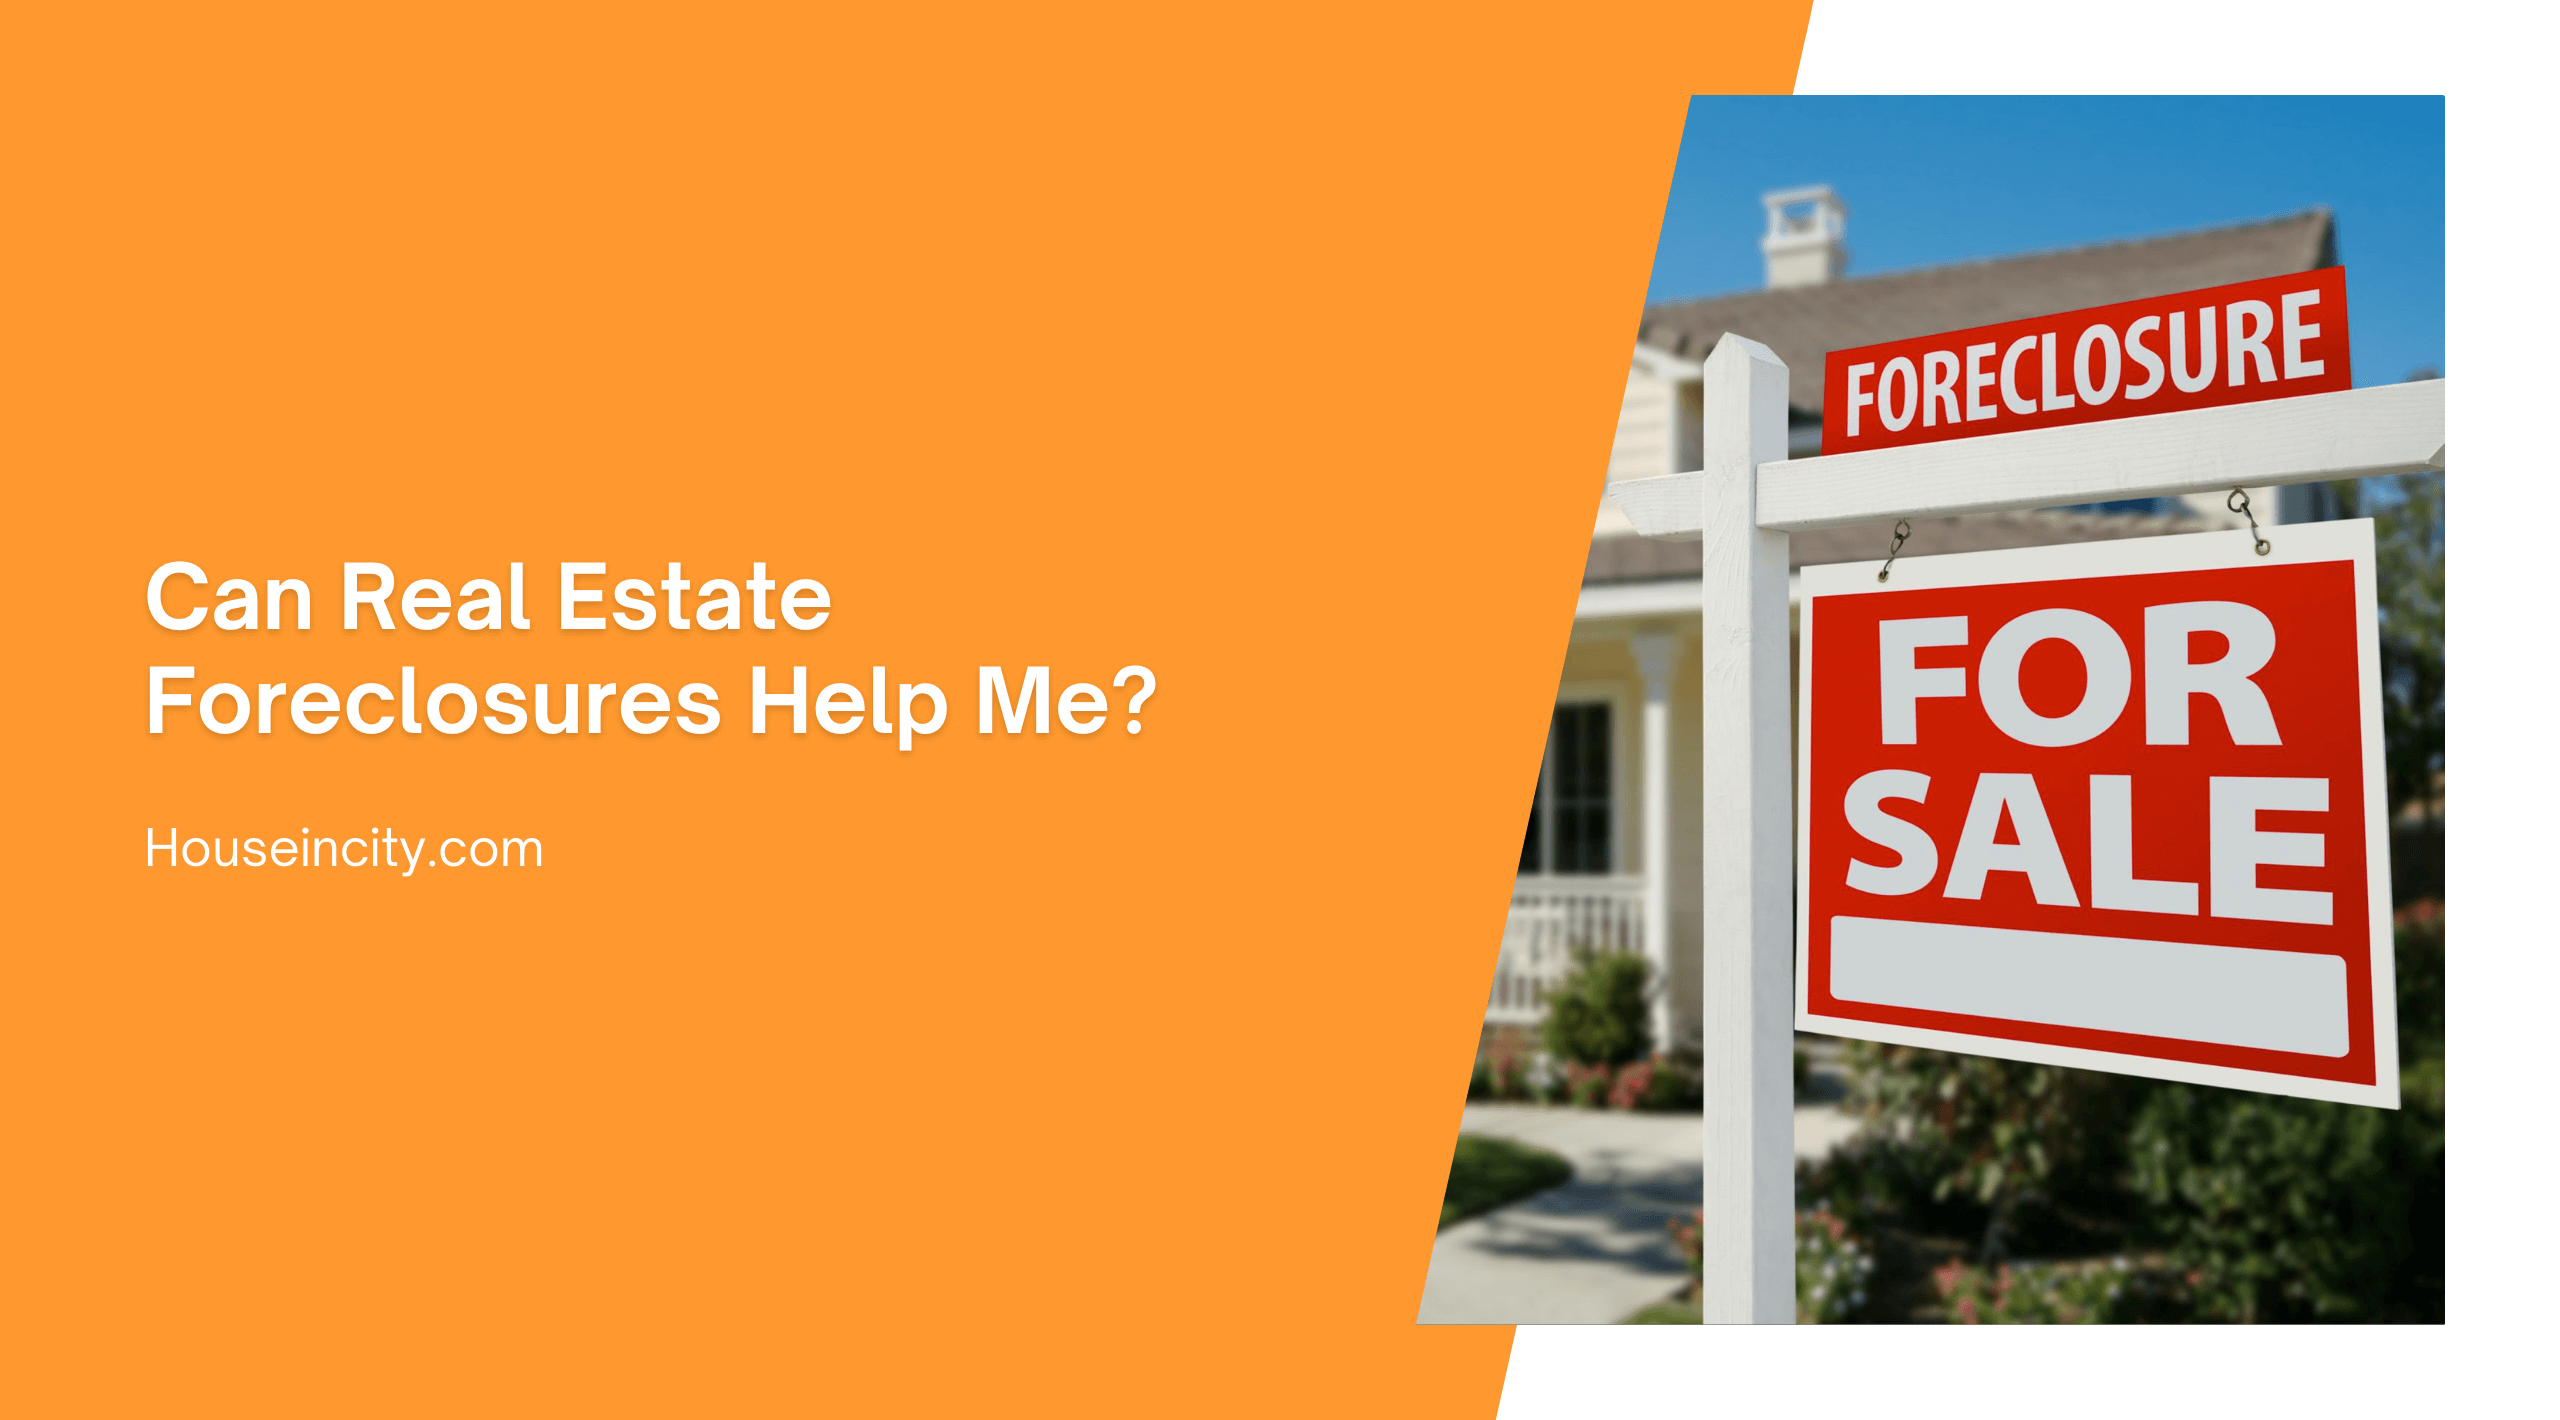 Can Real Estate Foreclosures Help Me?